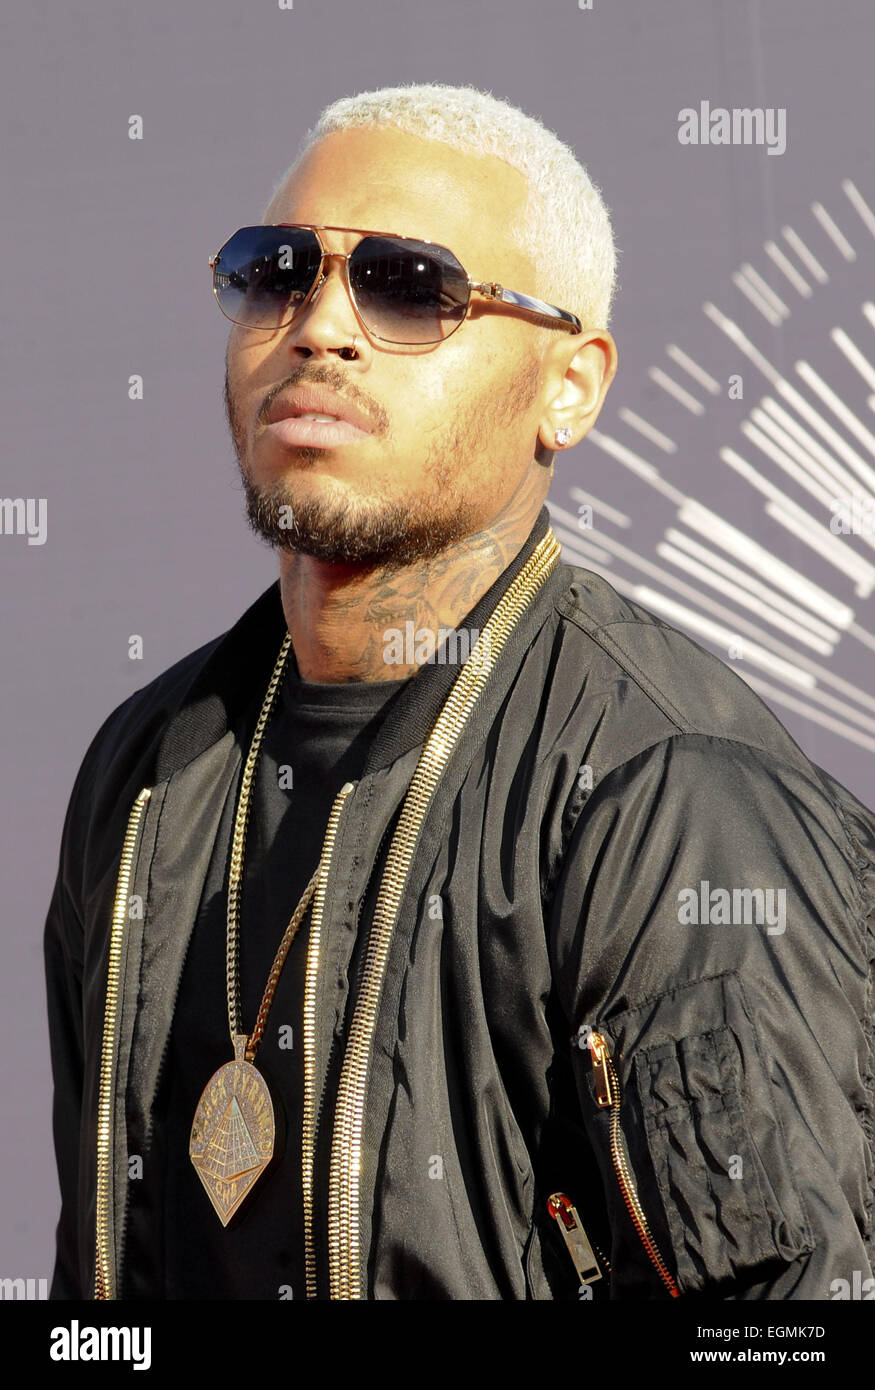 The 2014 MTV Video Music Awards arrivals Featuring: Chris Brown Where: Los Angeles, California, United States When: 25 Aug 2014 Stock Photo